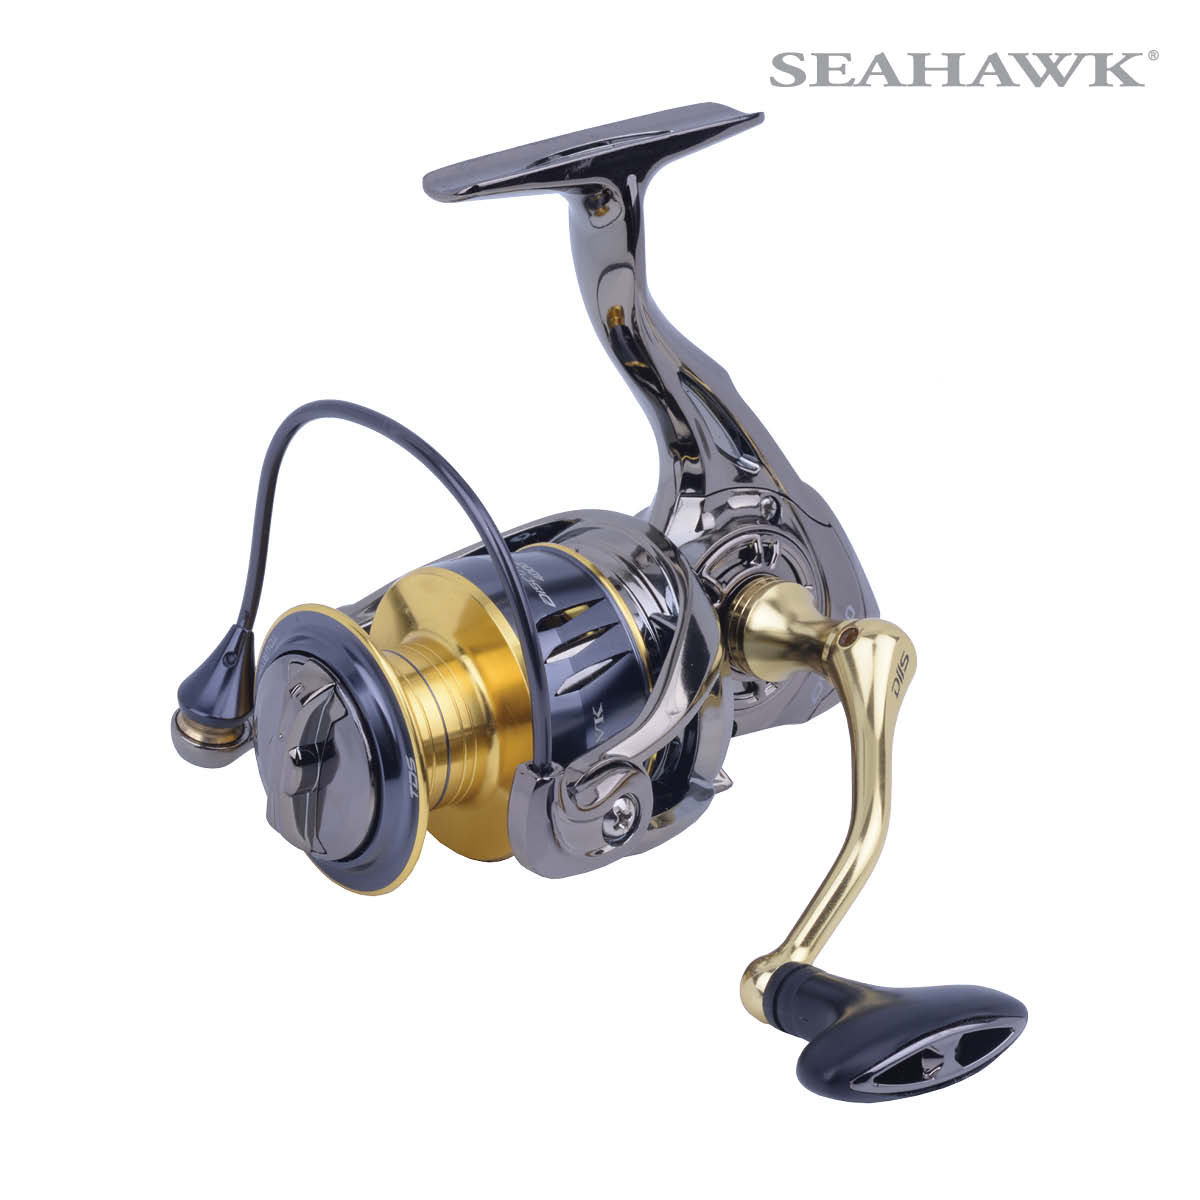 https://seahawkfishing.com/wp-content/uploads/2023/12/Seahawk-Discovery-01.jpg